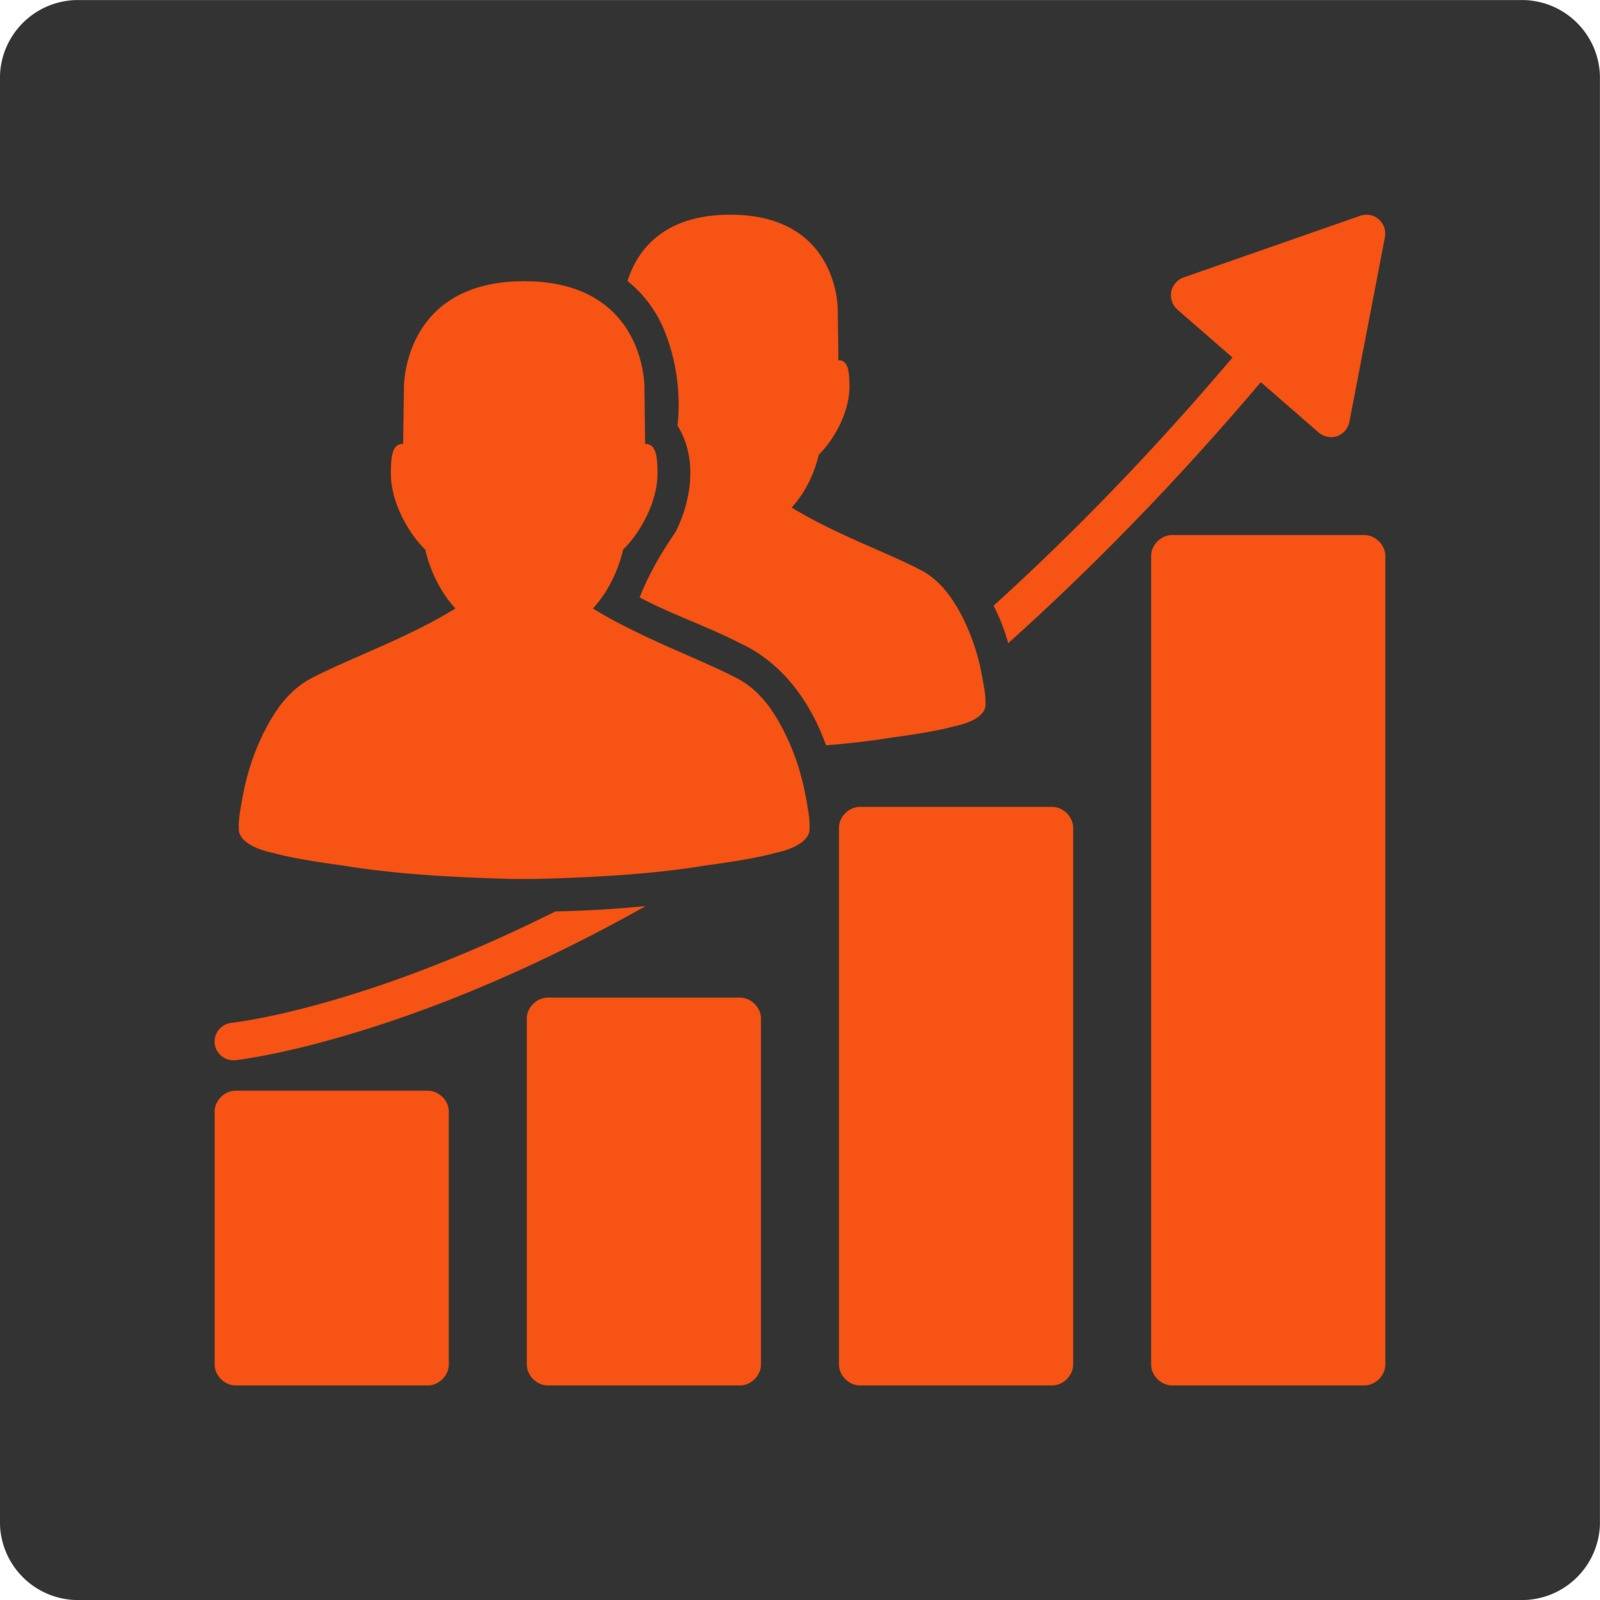 Audience Growth vector icon. This flat rounded square button uses orange and gray colors and isolated on a white background.